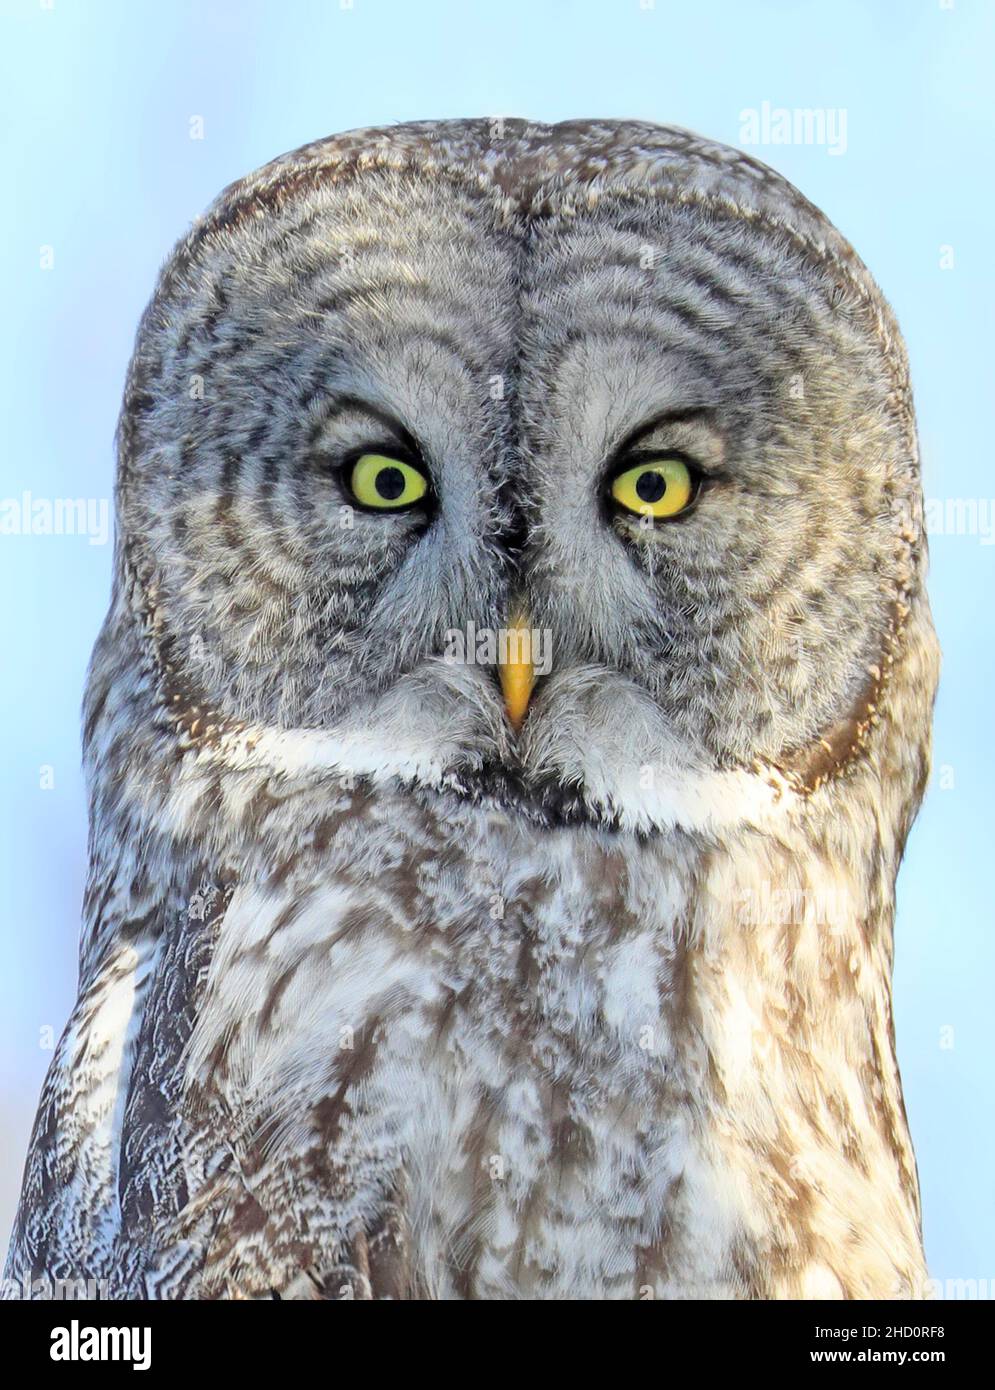 Great Grey Owl sitting on a tree branch in the forest, Quebec, Canada Stock Photo